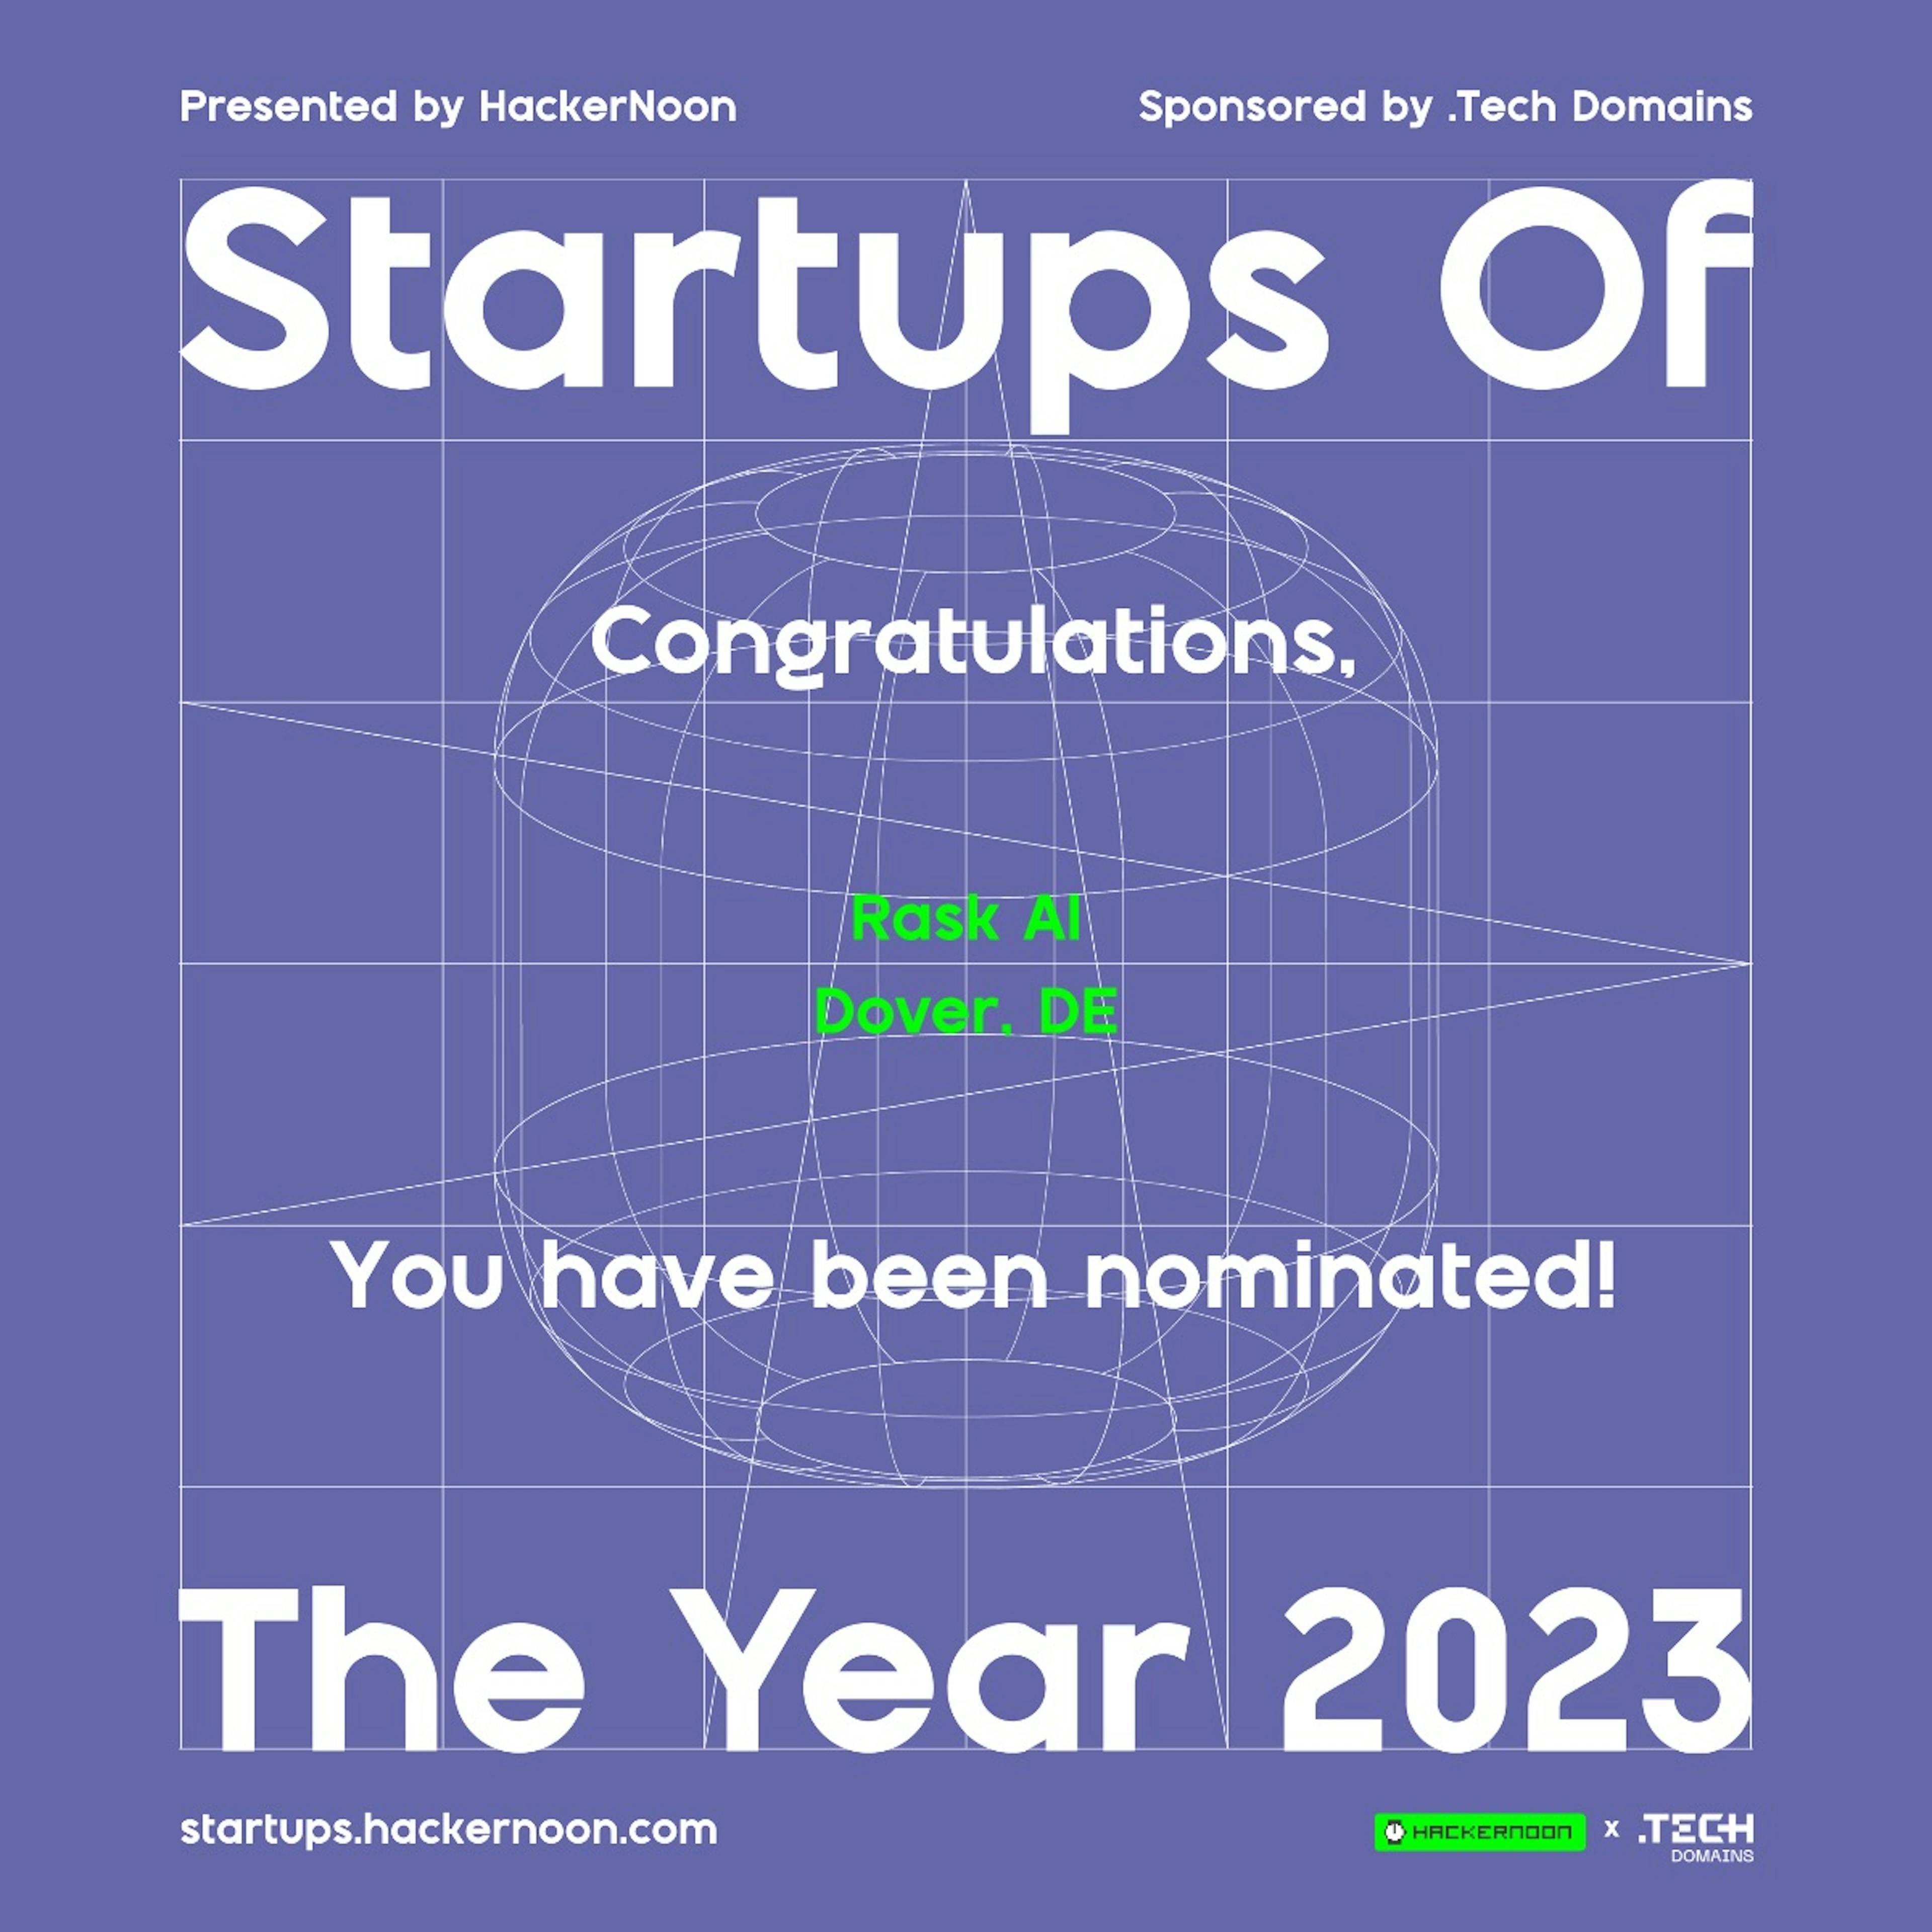 /startups-of-the-year-2023-rask-ai-startup-interview feature image